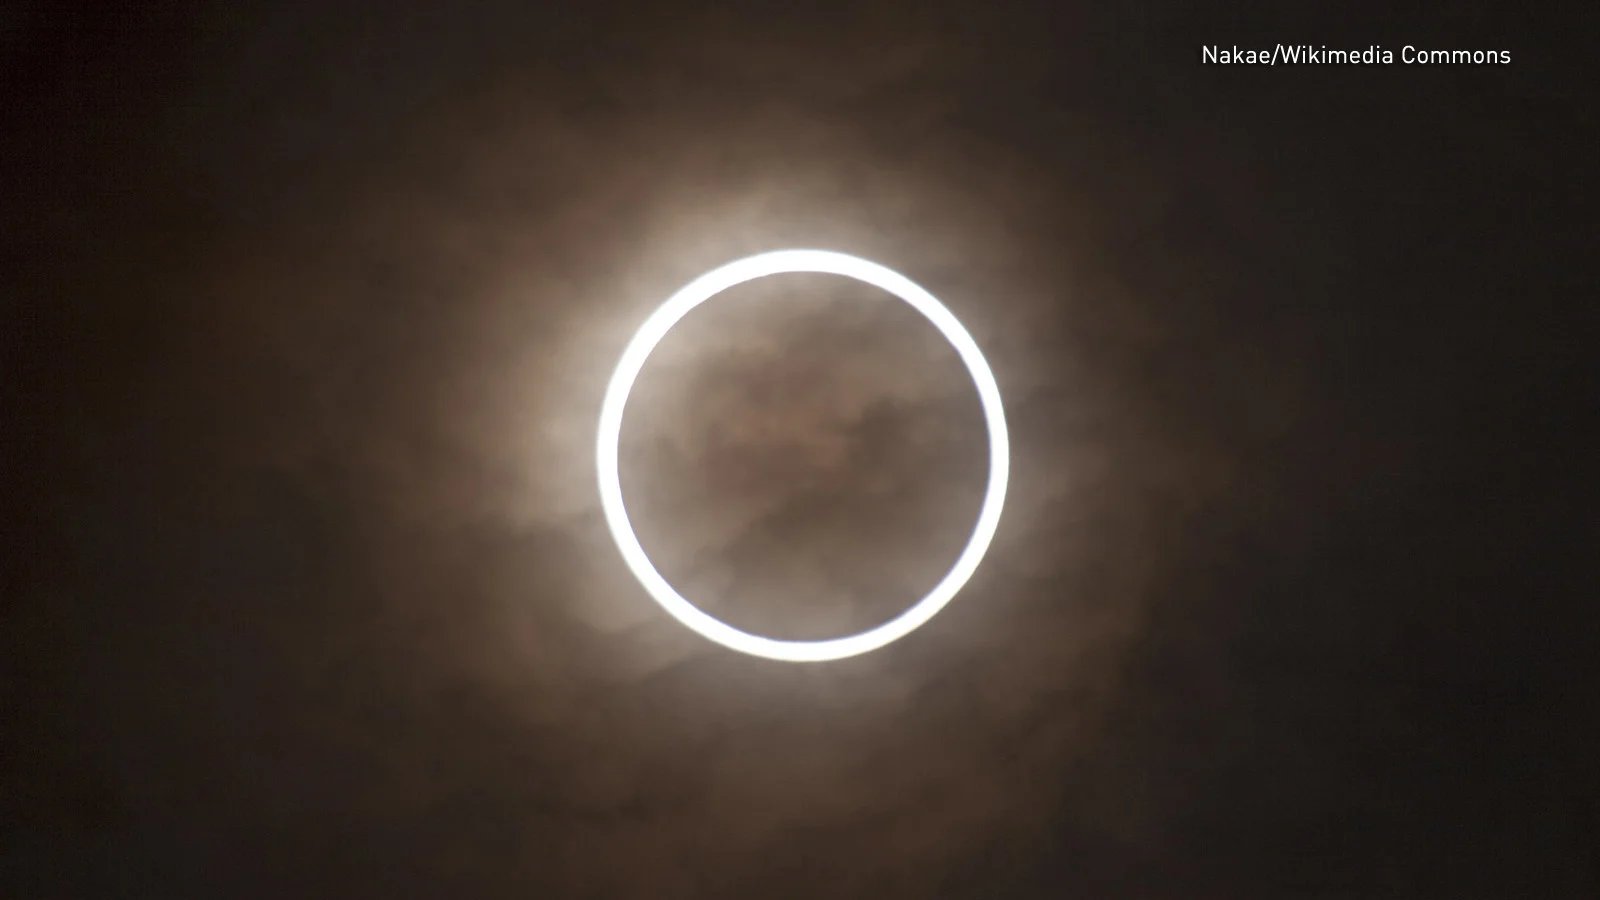 Don't miss this weekend's 'Ring of Fire' solar eclipse